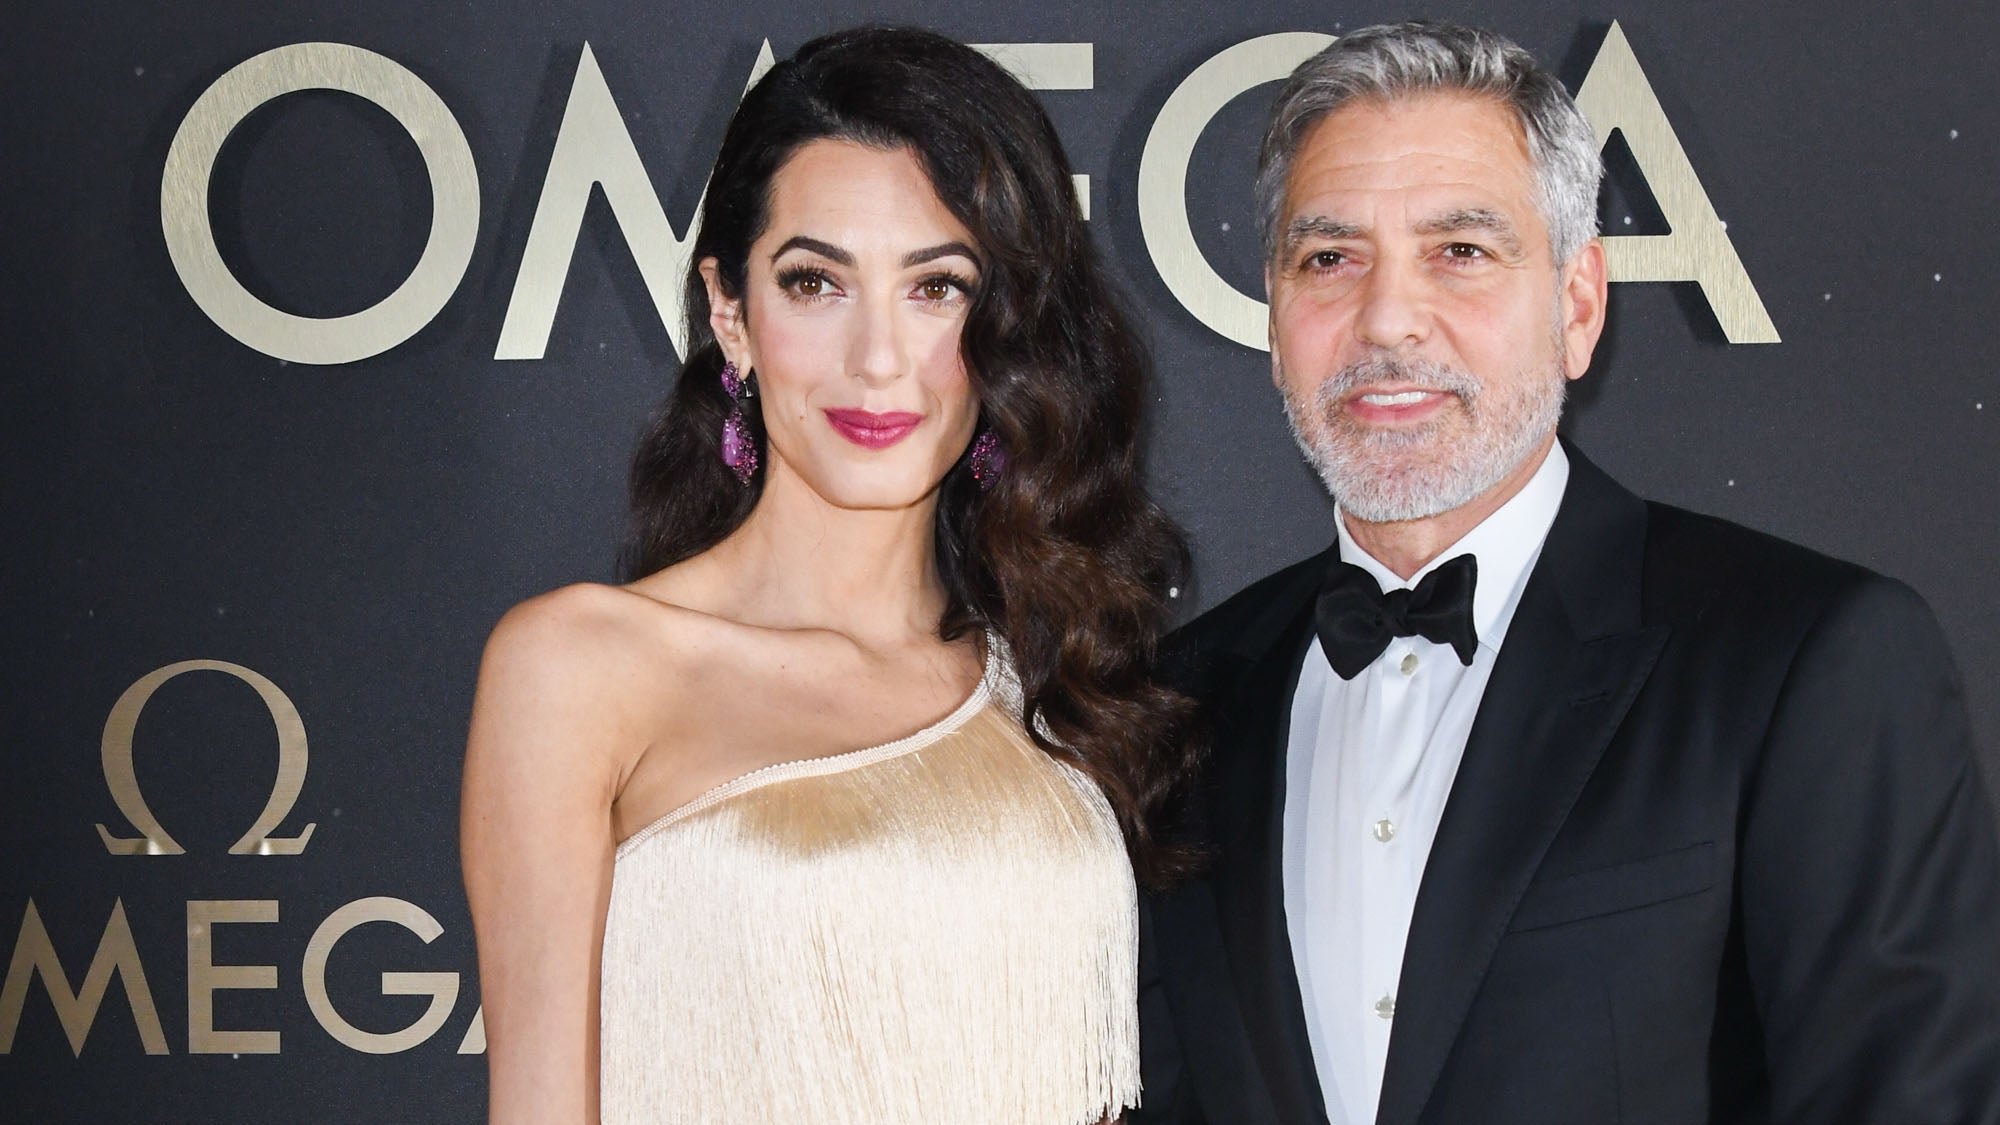 George Clooney wife Amal worn £34,000 of clothes while championing